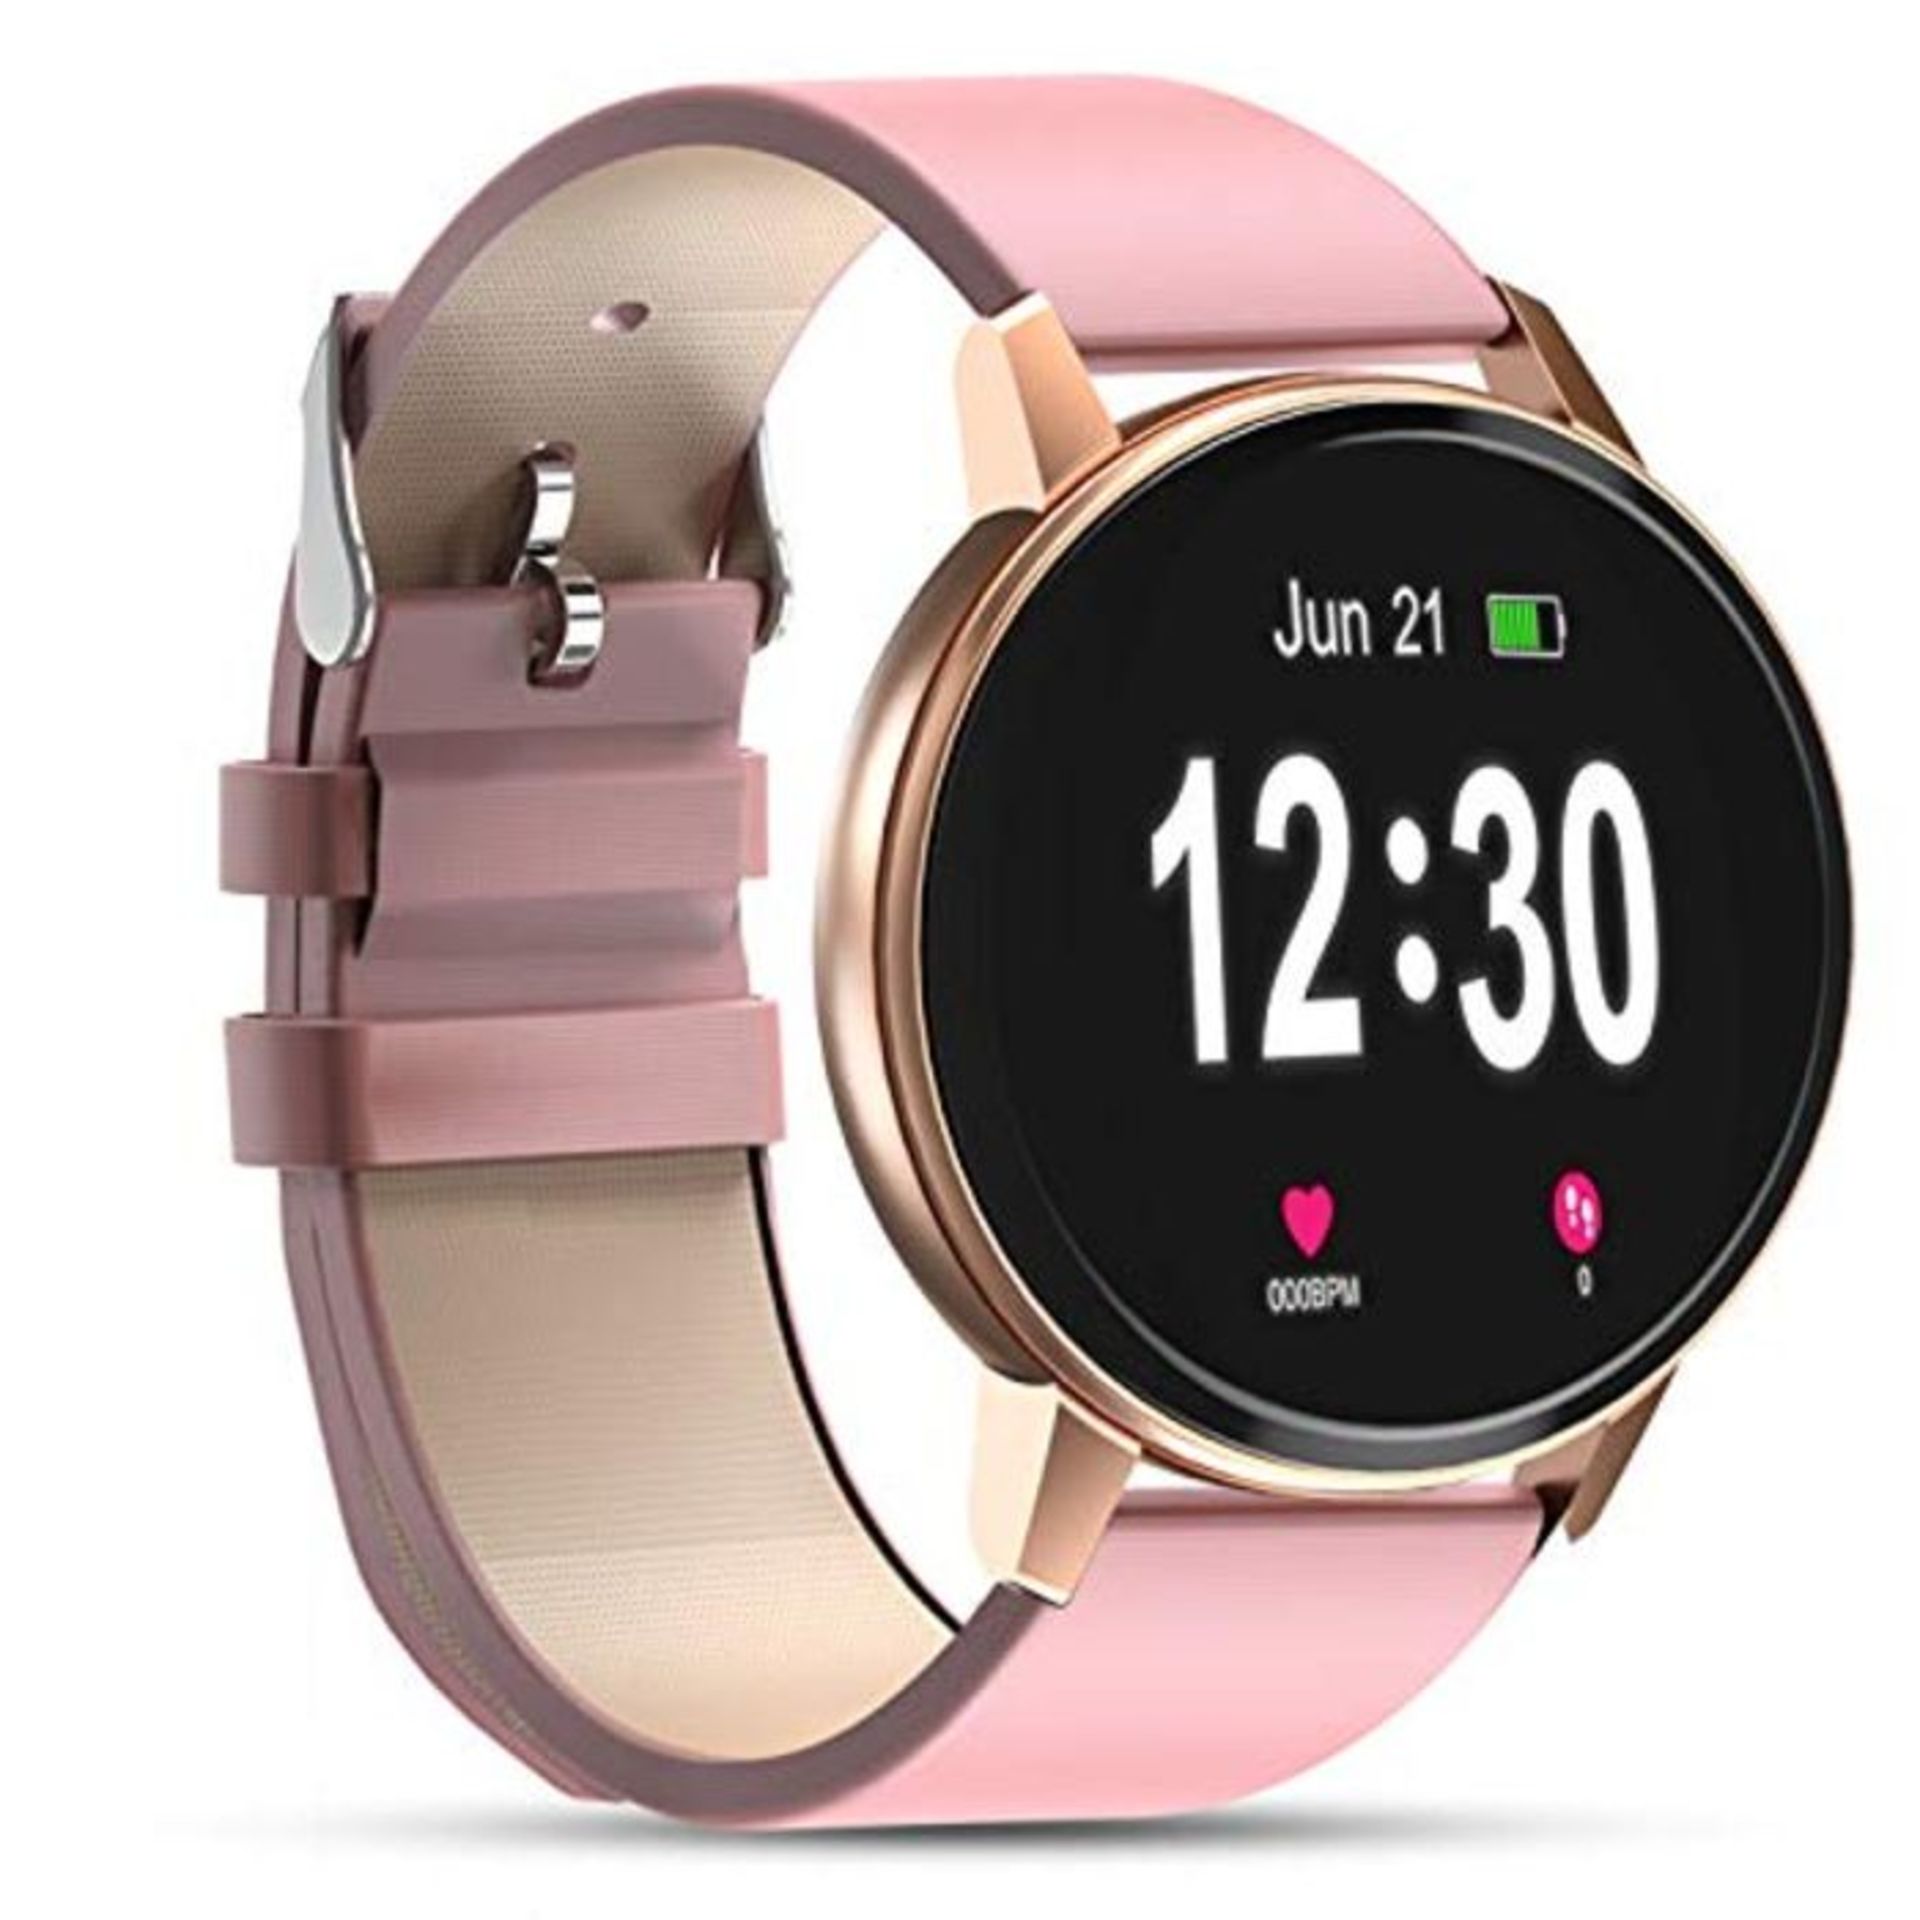 Bluetooth Smartwatch for Women,IP68 Waterproof with 1.3 Inch Full Touch Screen, Heart